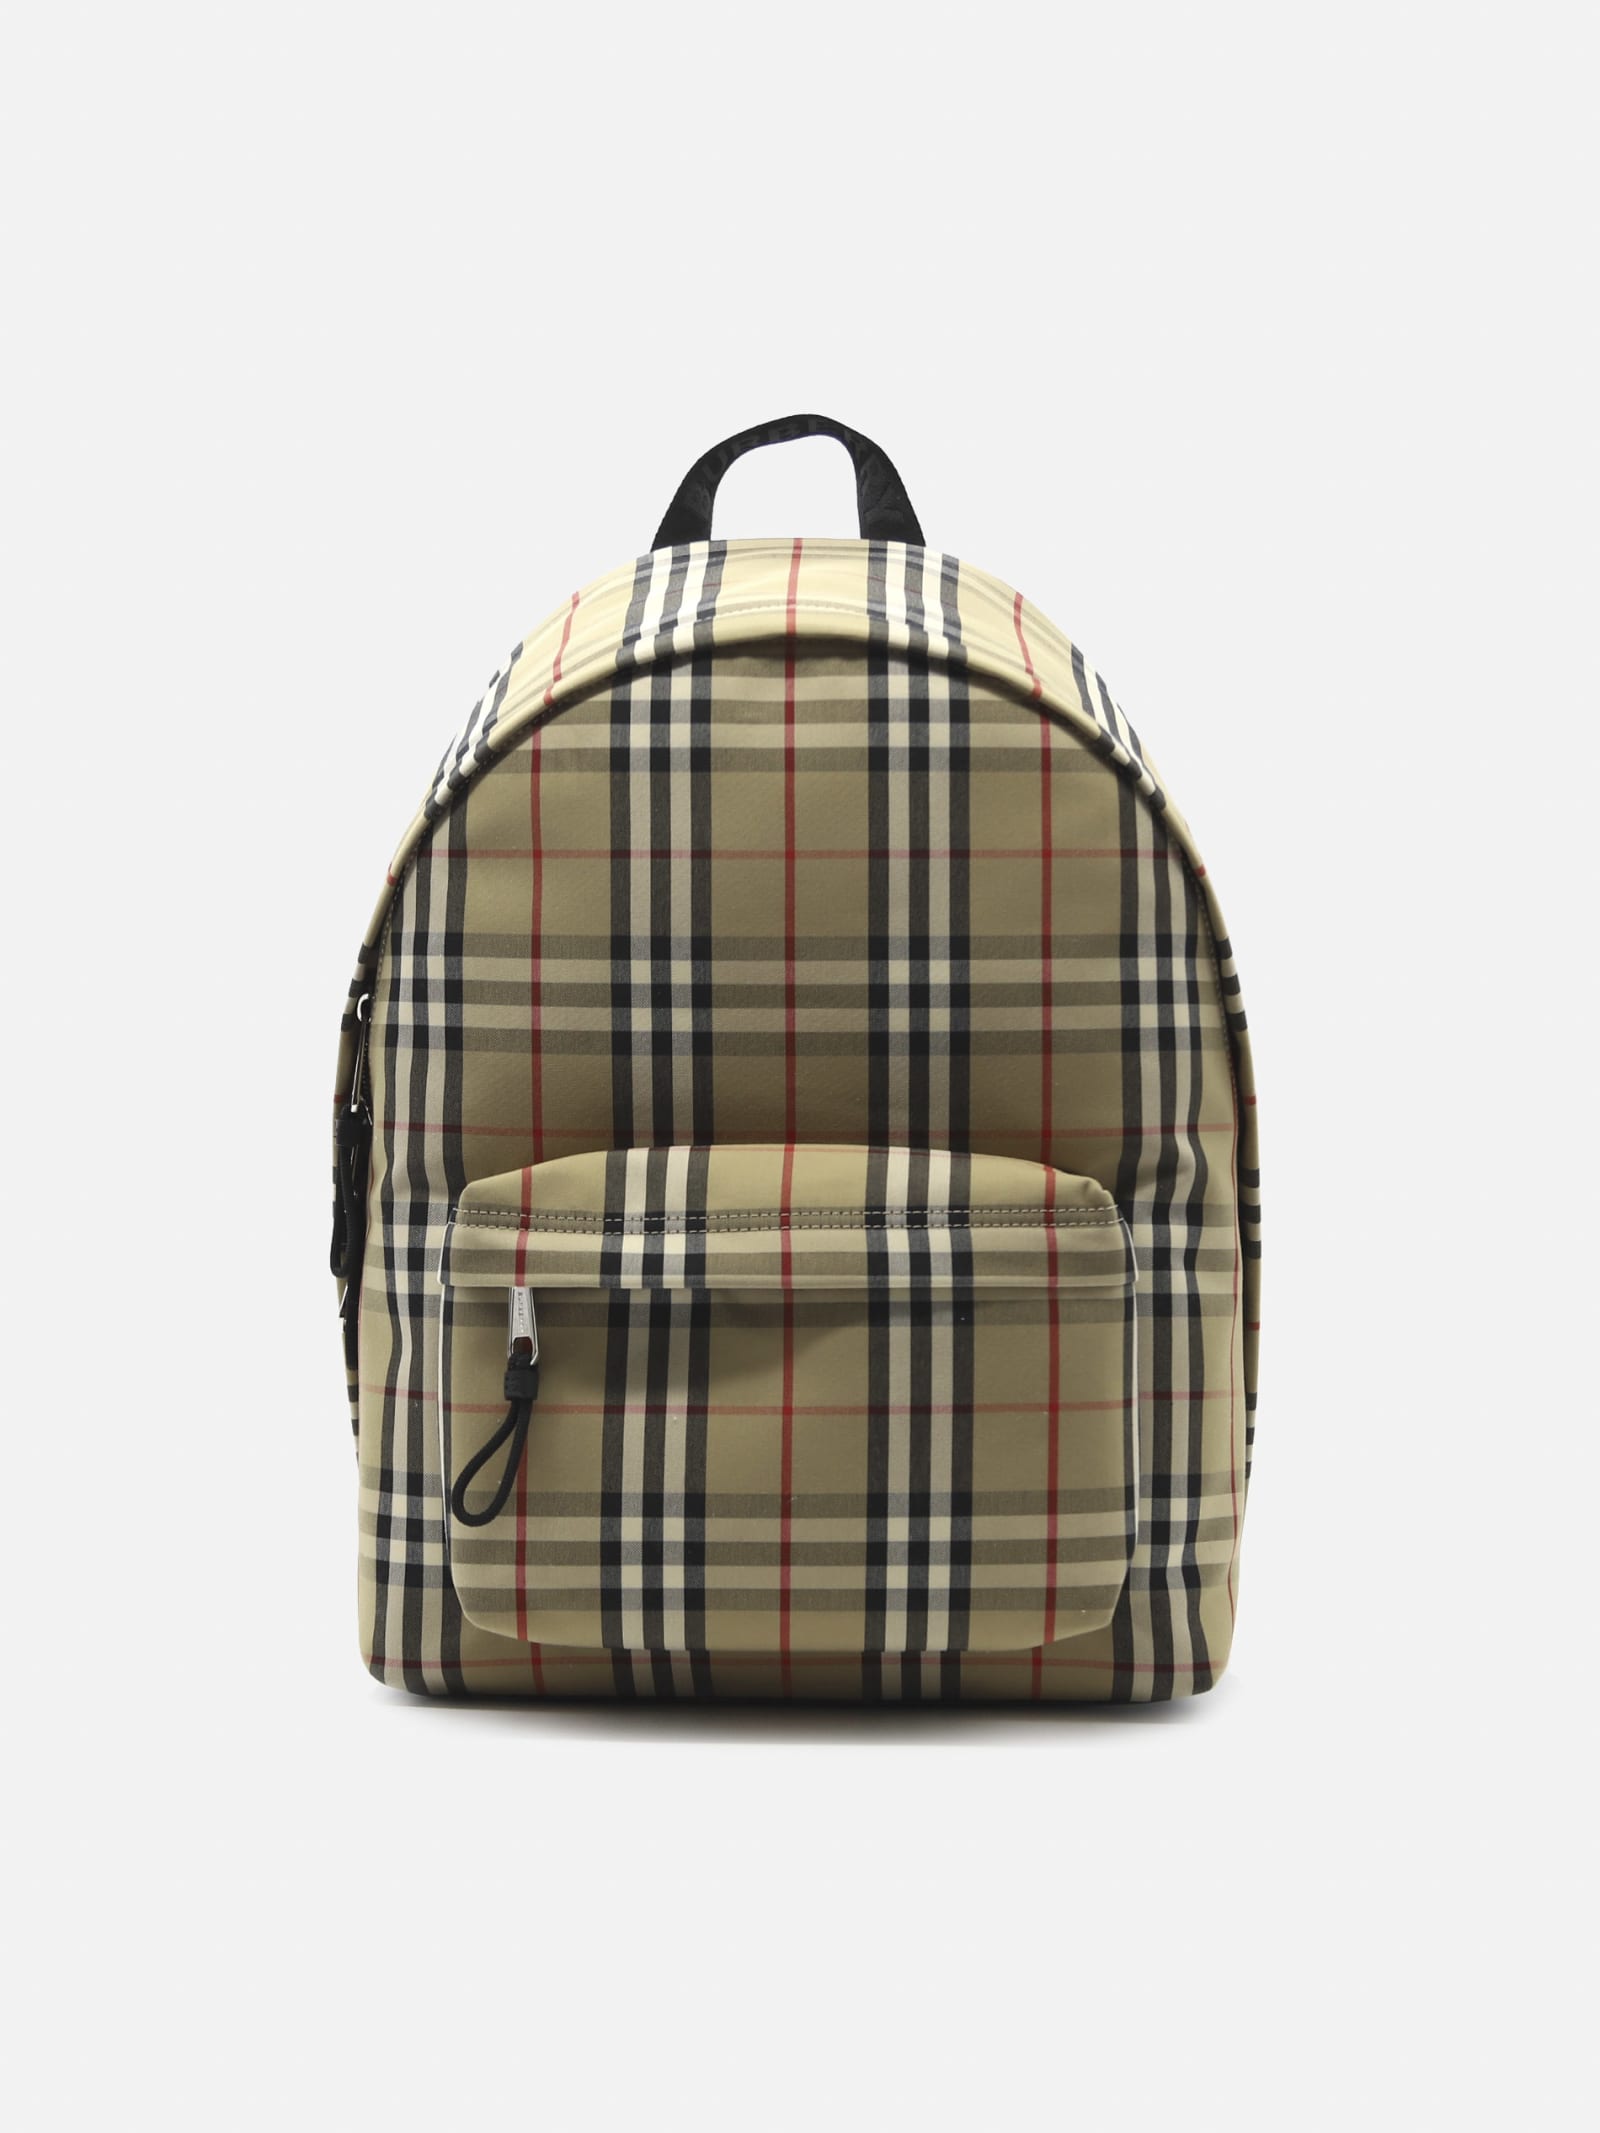 Burberry Backpack With Vintage Check Motif